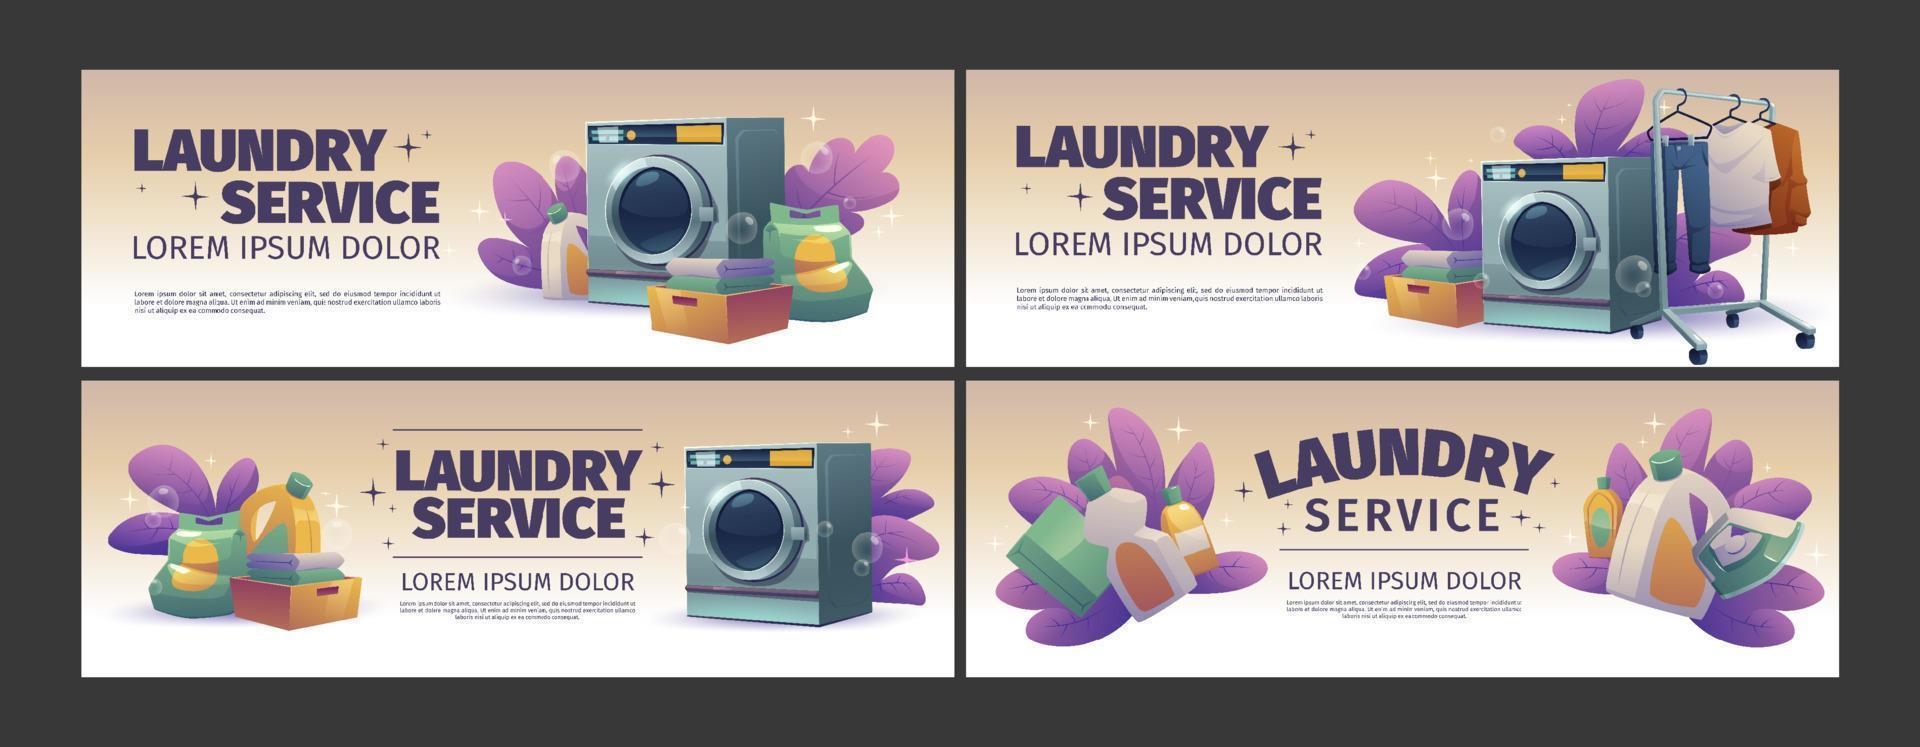 Laundry service posters with washing machine vector